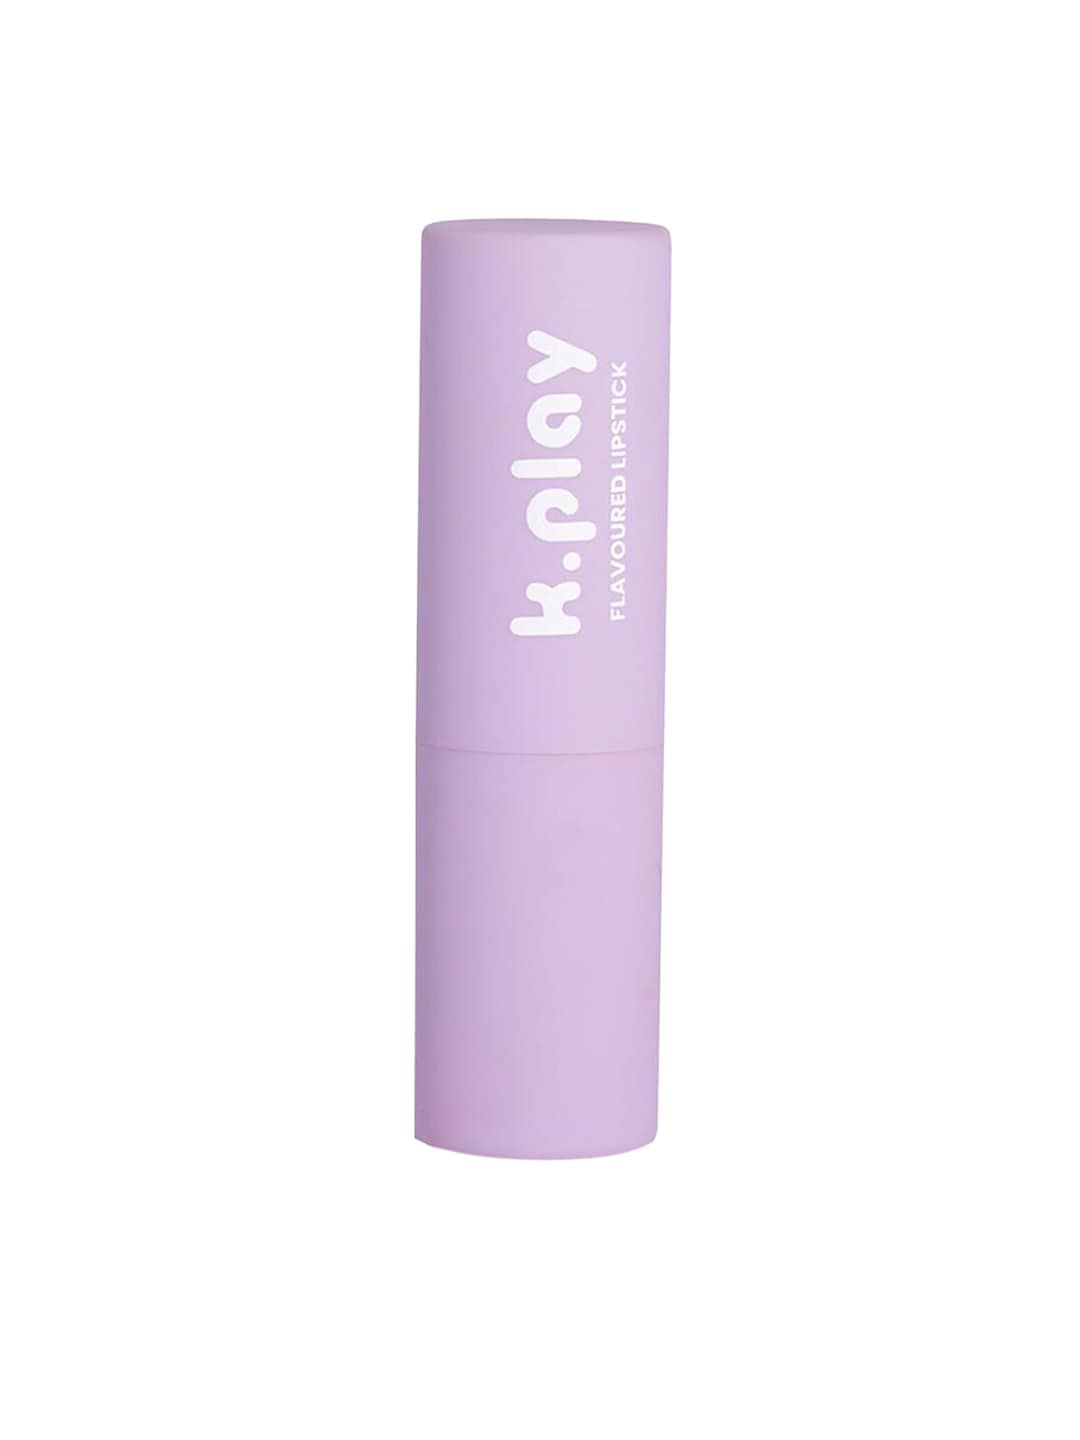 MyGlamm K.Play Flavoured Lipstick-Passion Fruit Crush-4.2g Price in India